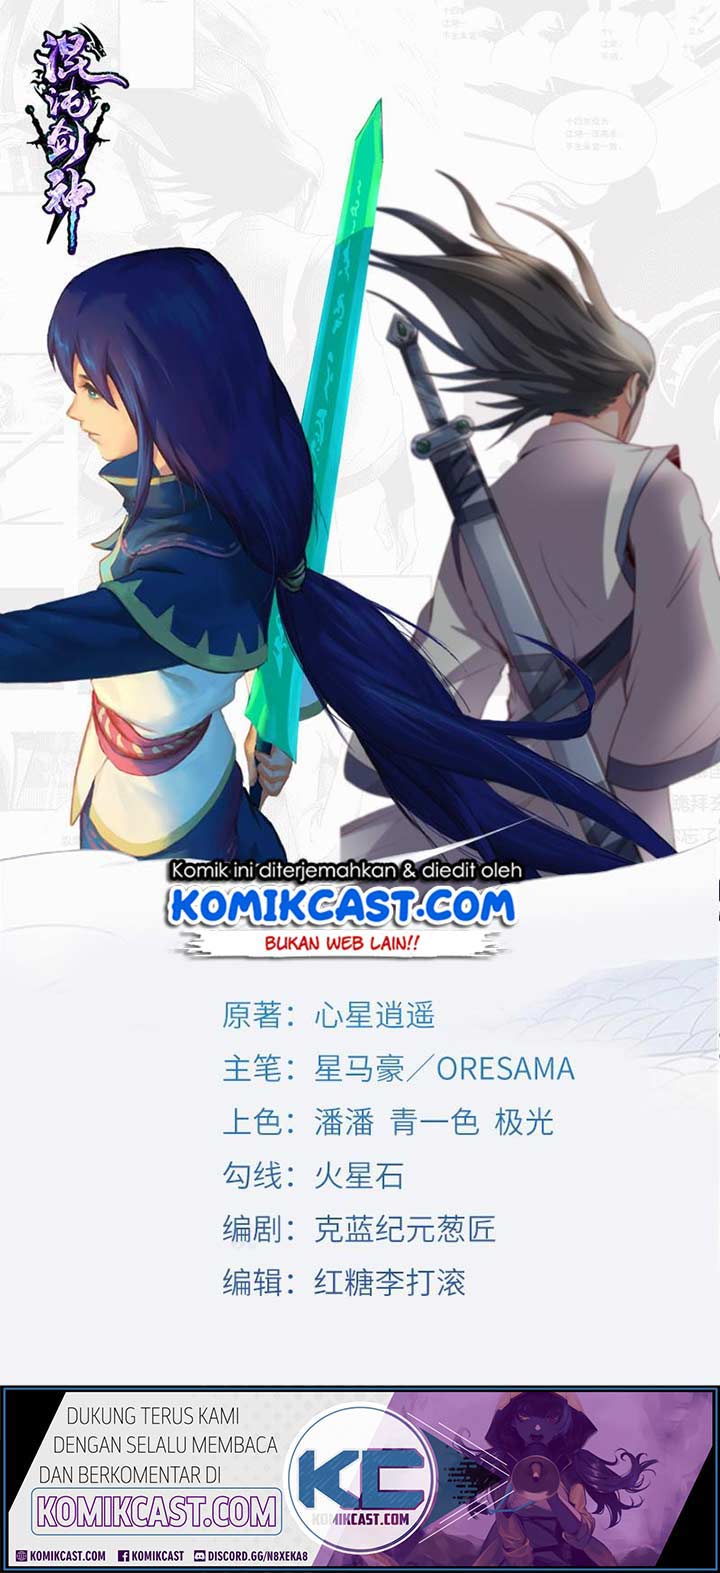 Chaotic Sword God Chapter 196